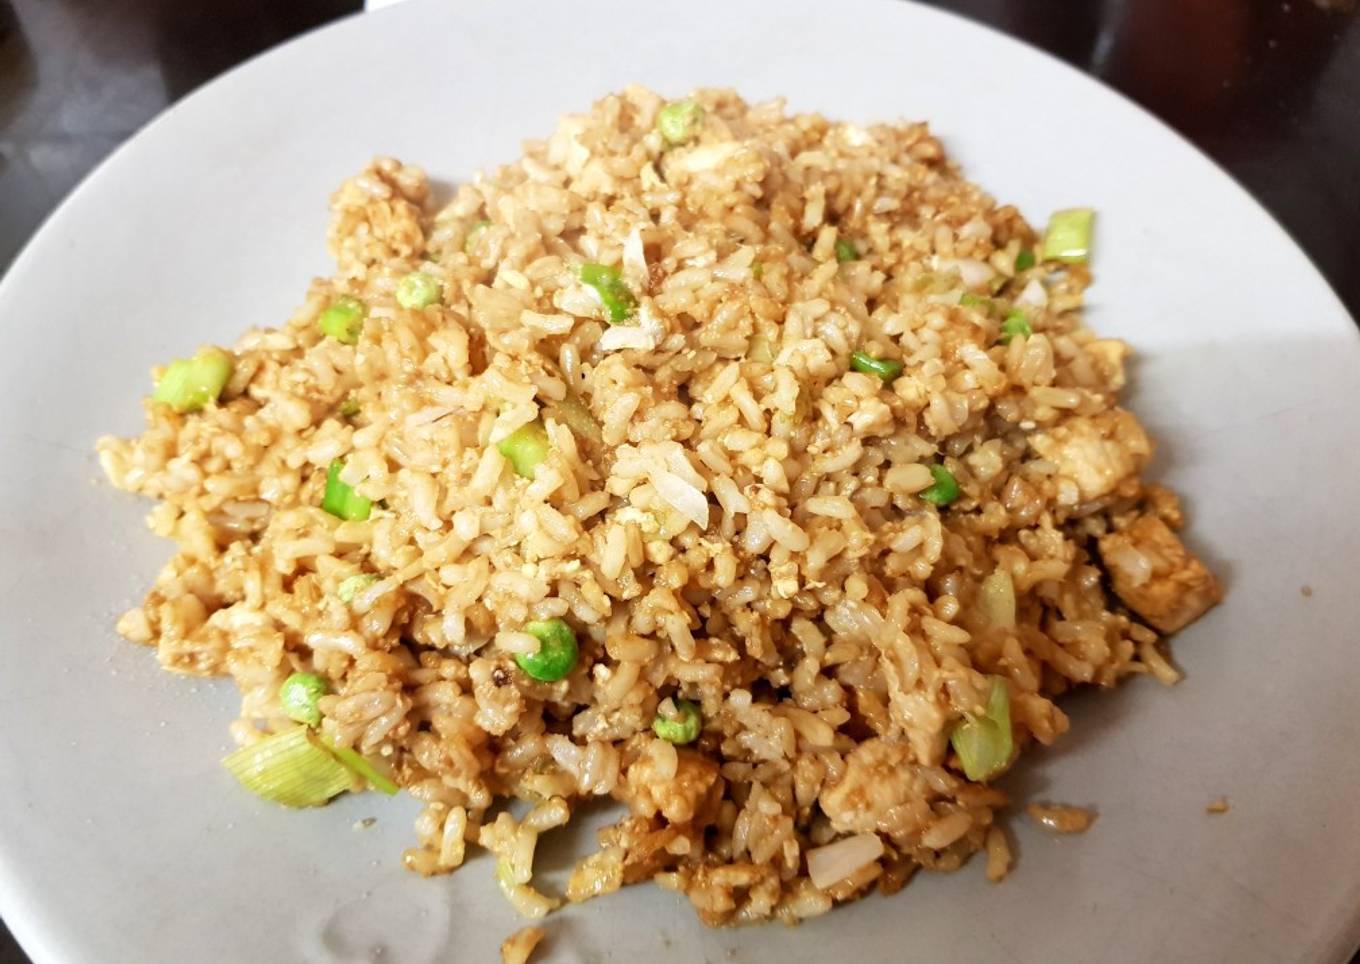 My Wholemeal Chicken, Egg Fried Rice 😀